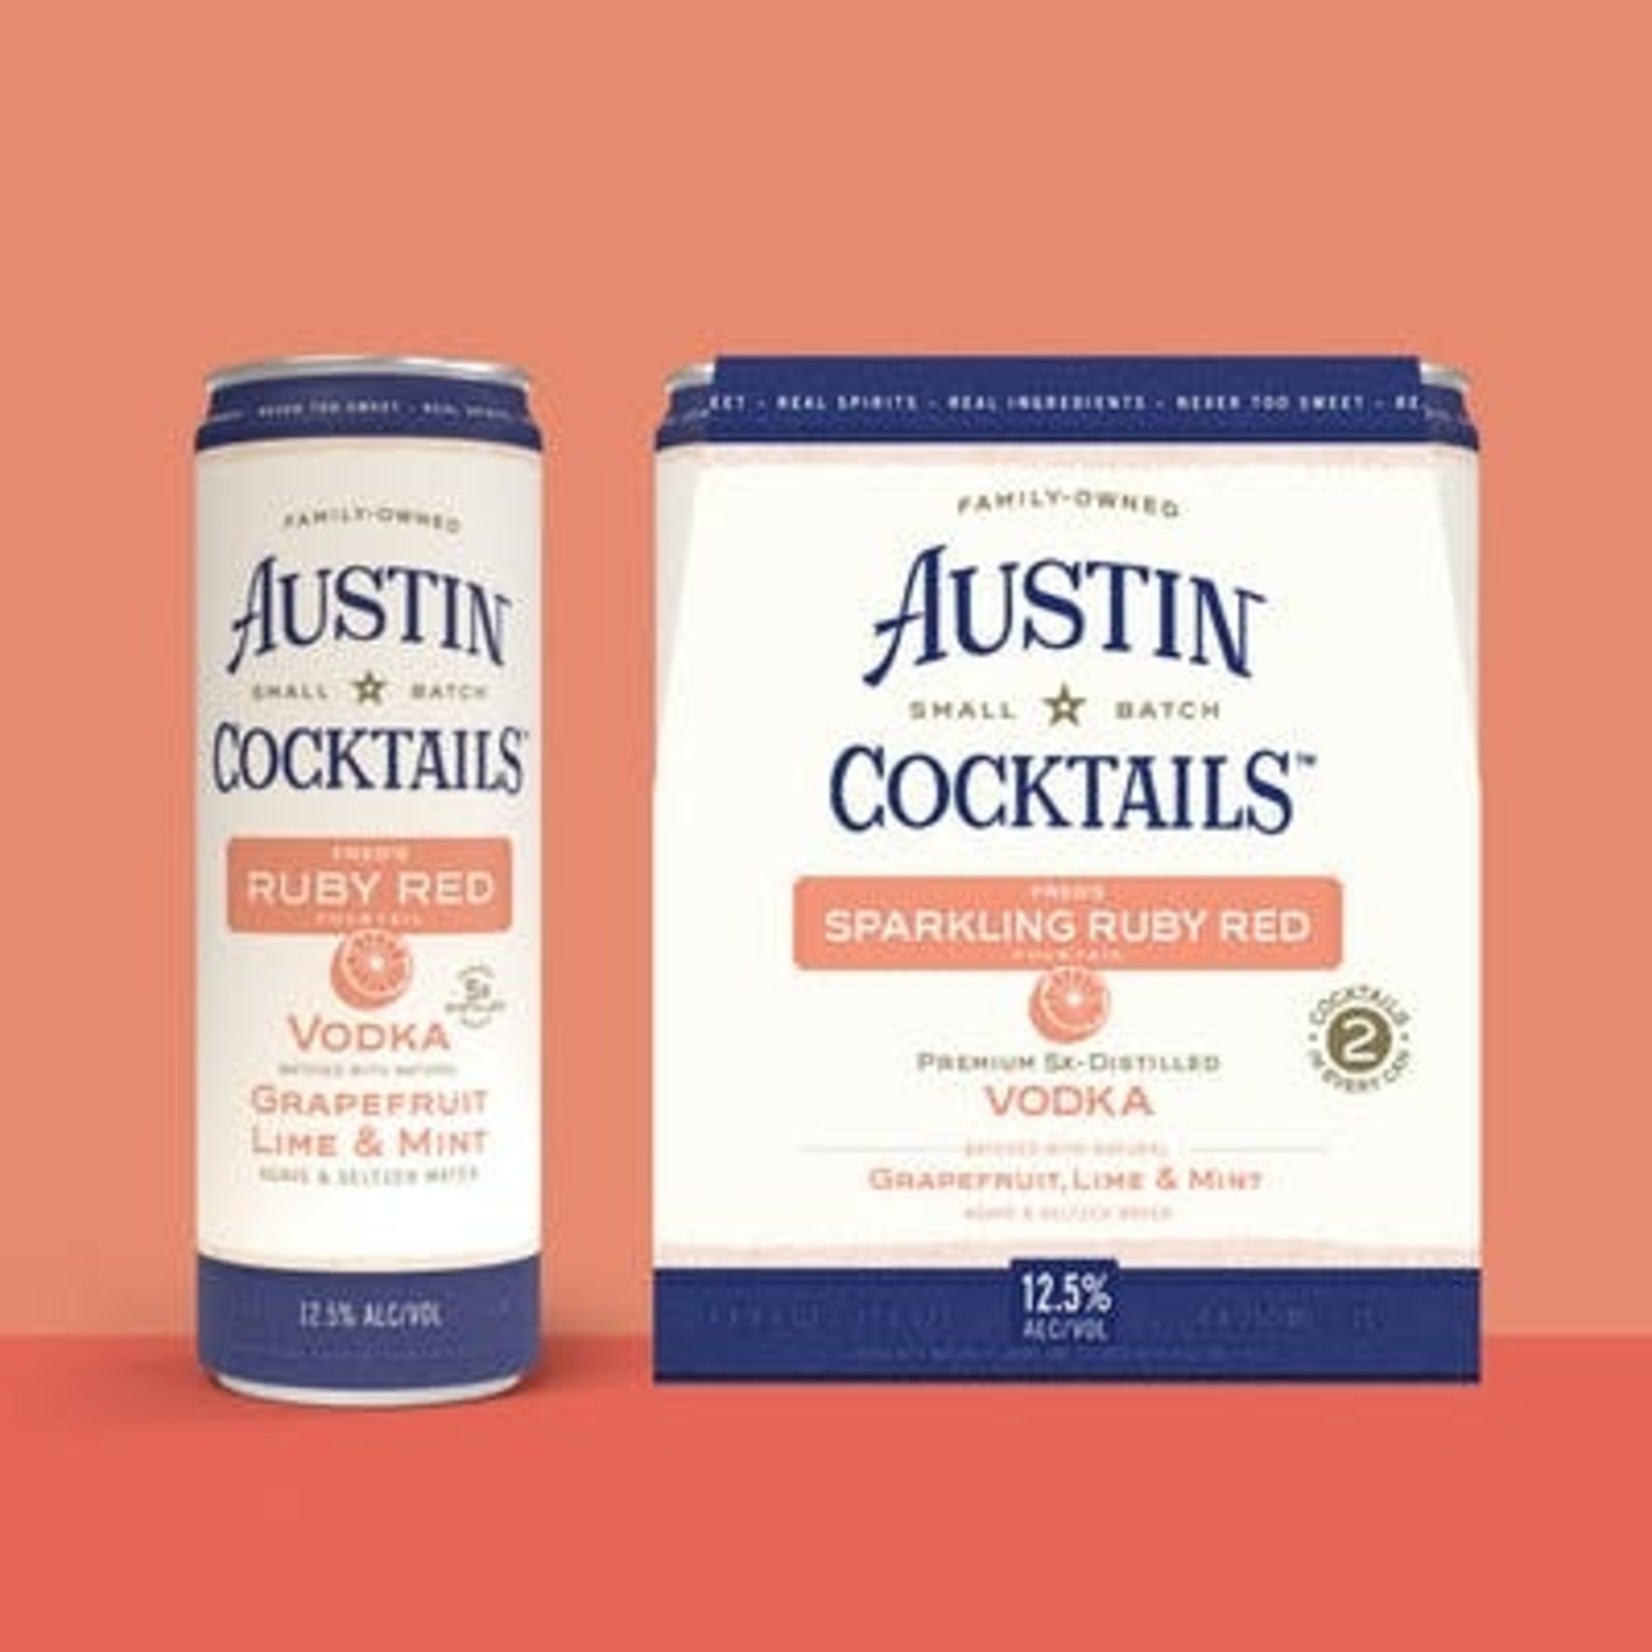 AUSTIN COCKTAILS SPARKLING RUBY RED COCKTAIL GRAPEFRUIT, LIME & MINT 25PF 250ML CAN